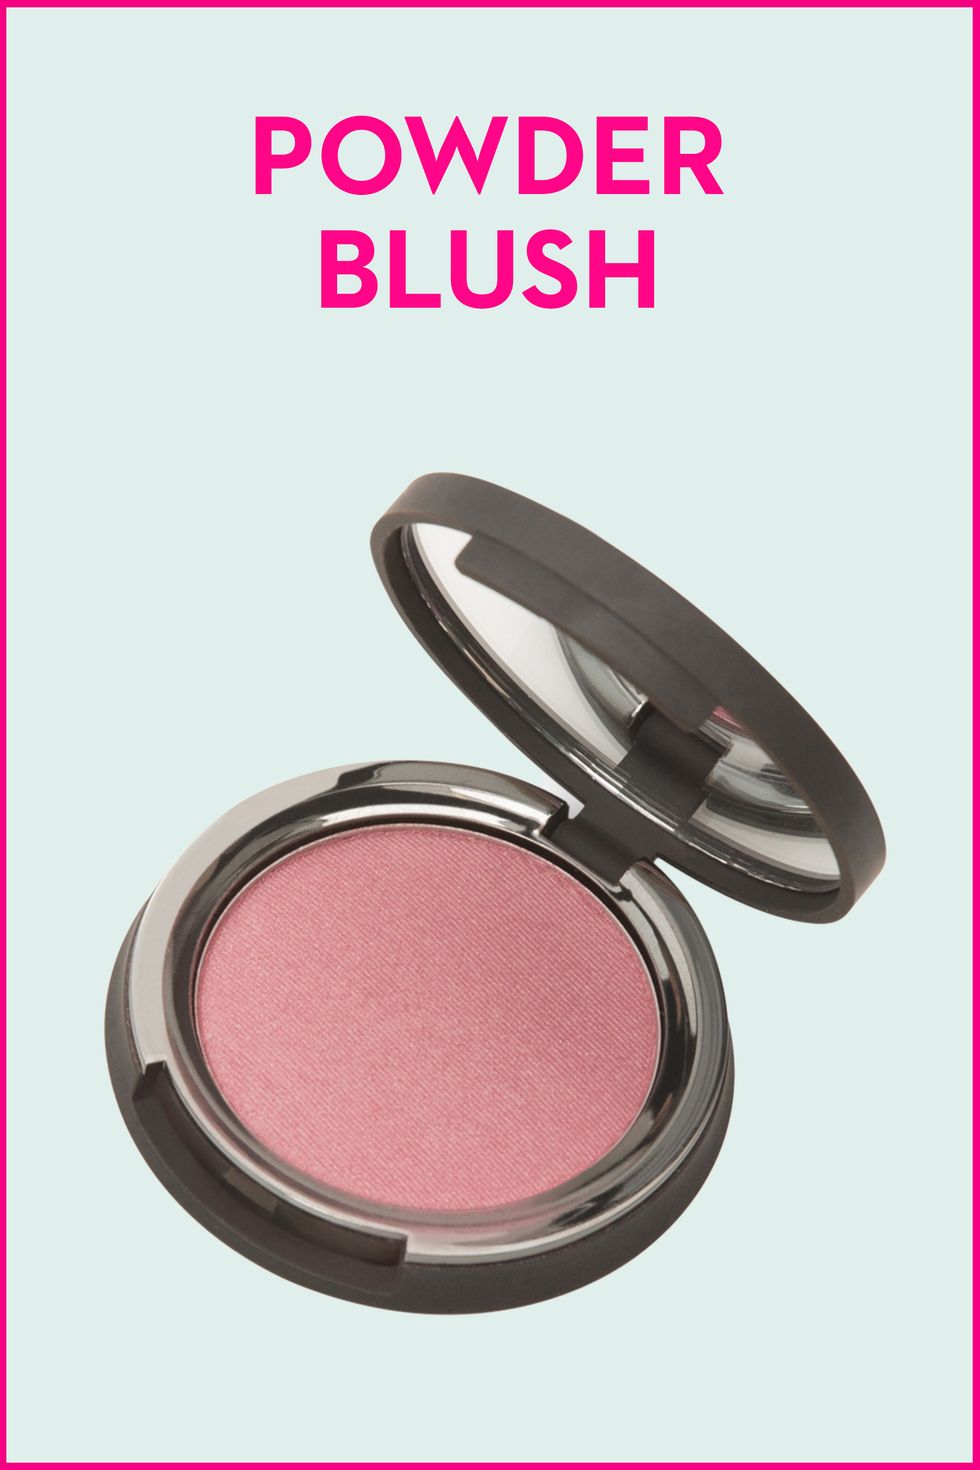 Smooth Shape 360 Smoother - Powder Pink